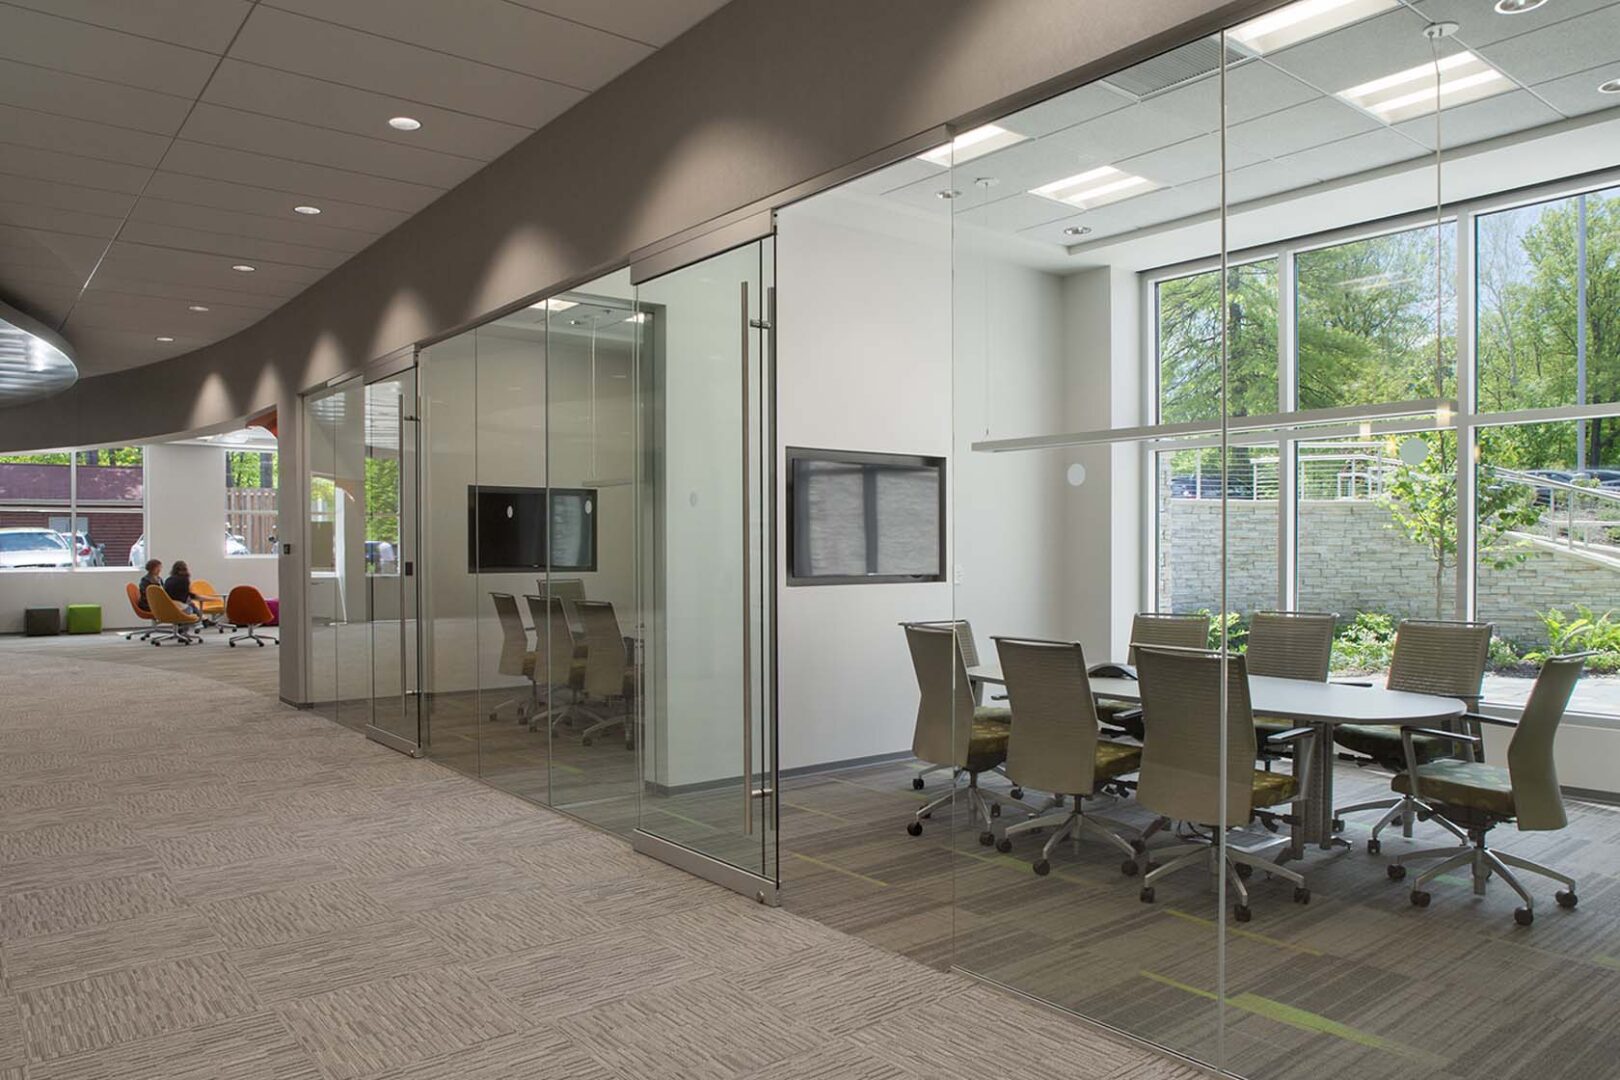 Glass walled conference rooms